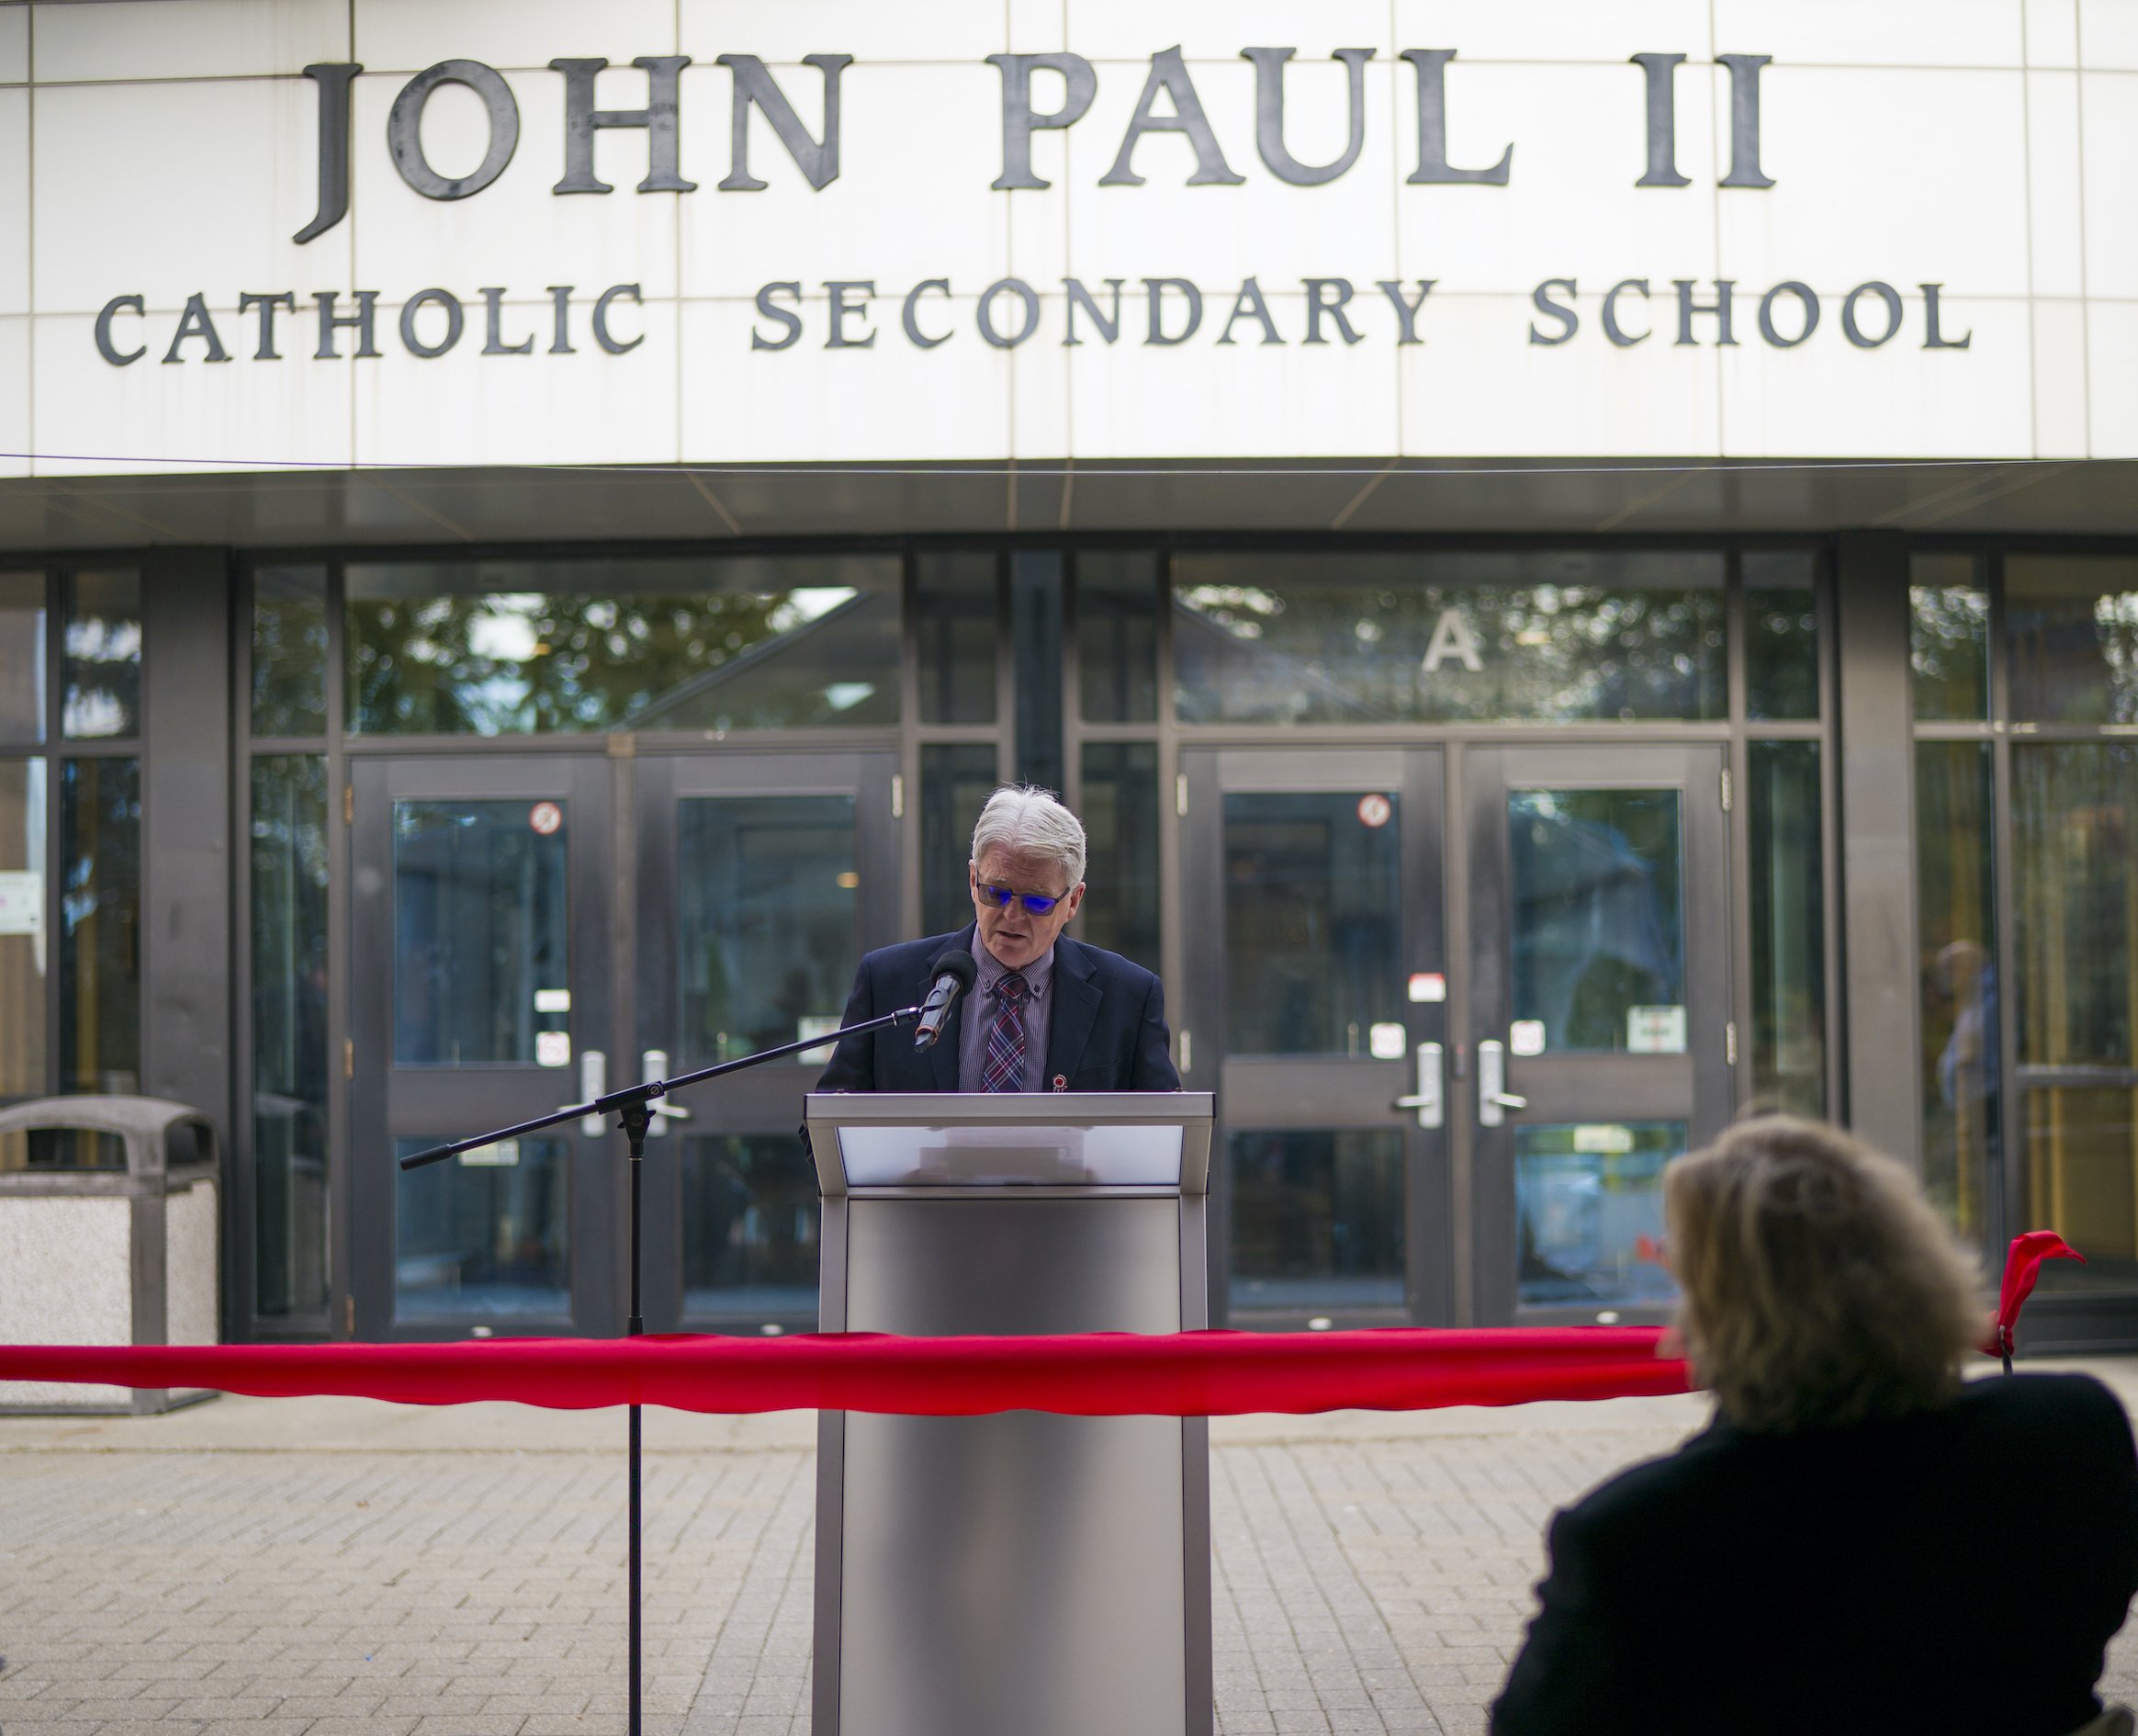 Peter Cassidy, principal at John Paul II Secondary School, speaks at the ribbon-cutting ceremony for the newly retrofitted carbon-neutral school in London, Ontario, Nov. 2. (CNS photo/courtesy Raymond Garcia, via Catholic Register)